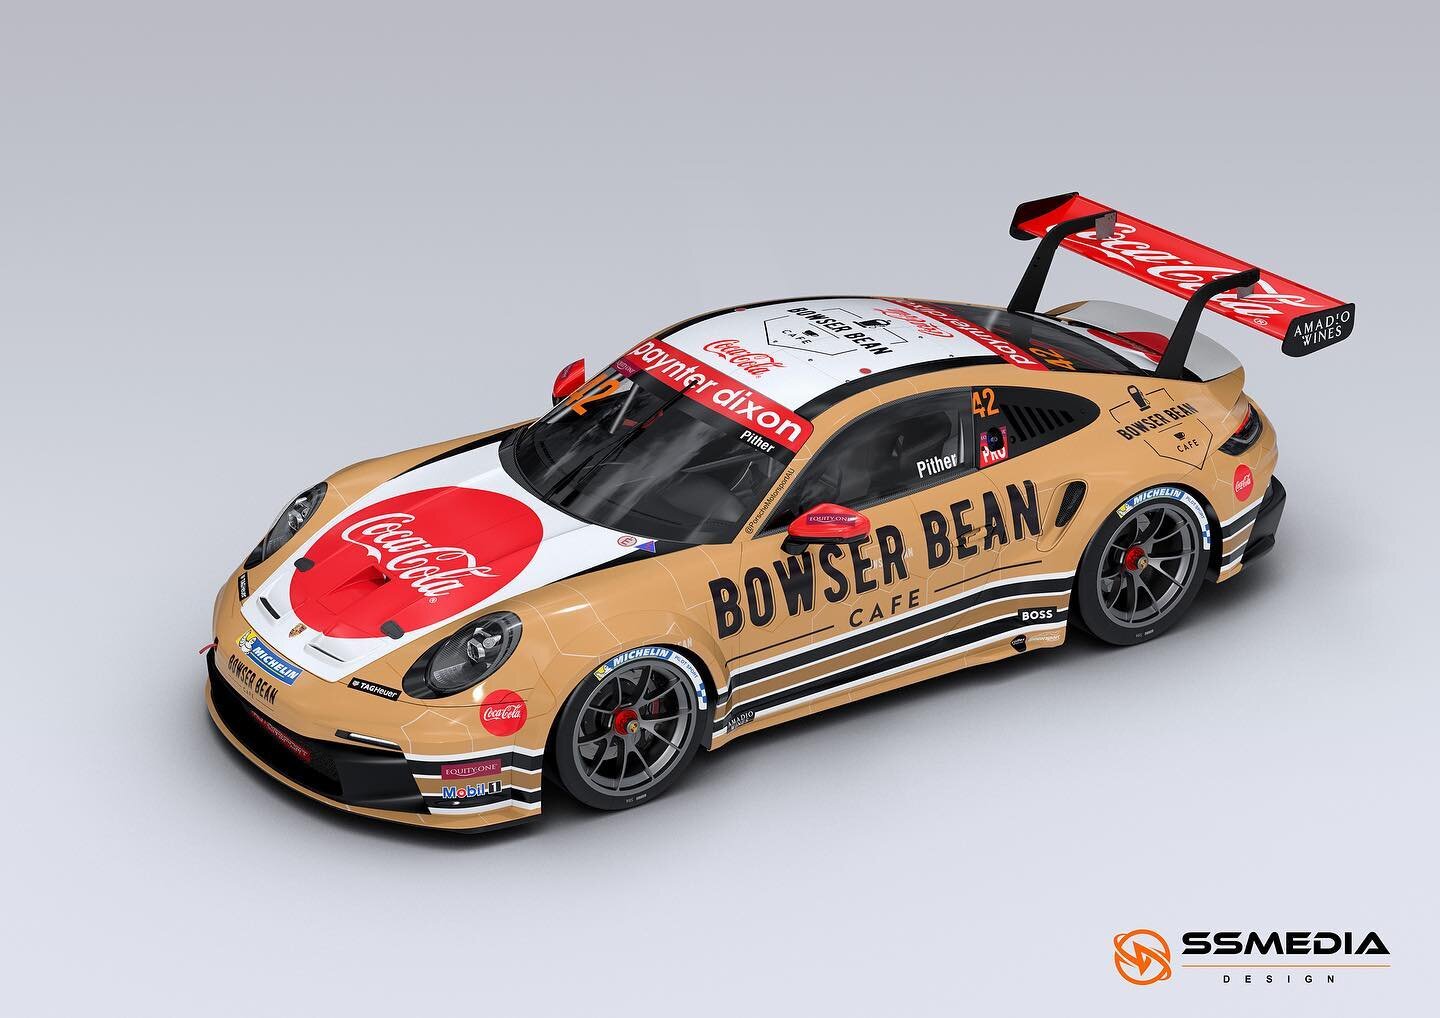 Such an impressive initial concept! The collaboration between @bowserbeancafe and @cocacolaepofficial, brought to life by the talented @ssmedia.est75. 

It's a pity we couldn't secure a car for the @porschemotorsportau Carrera Cup this weekend.